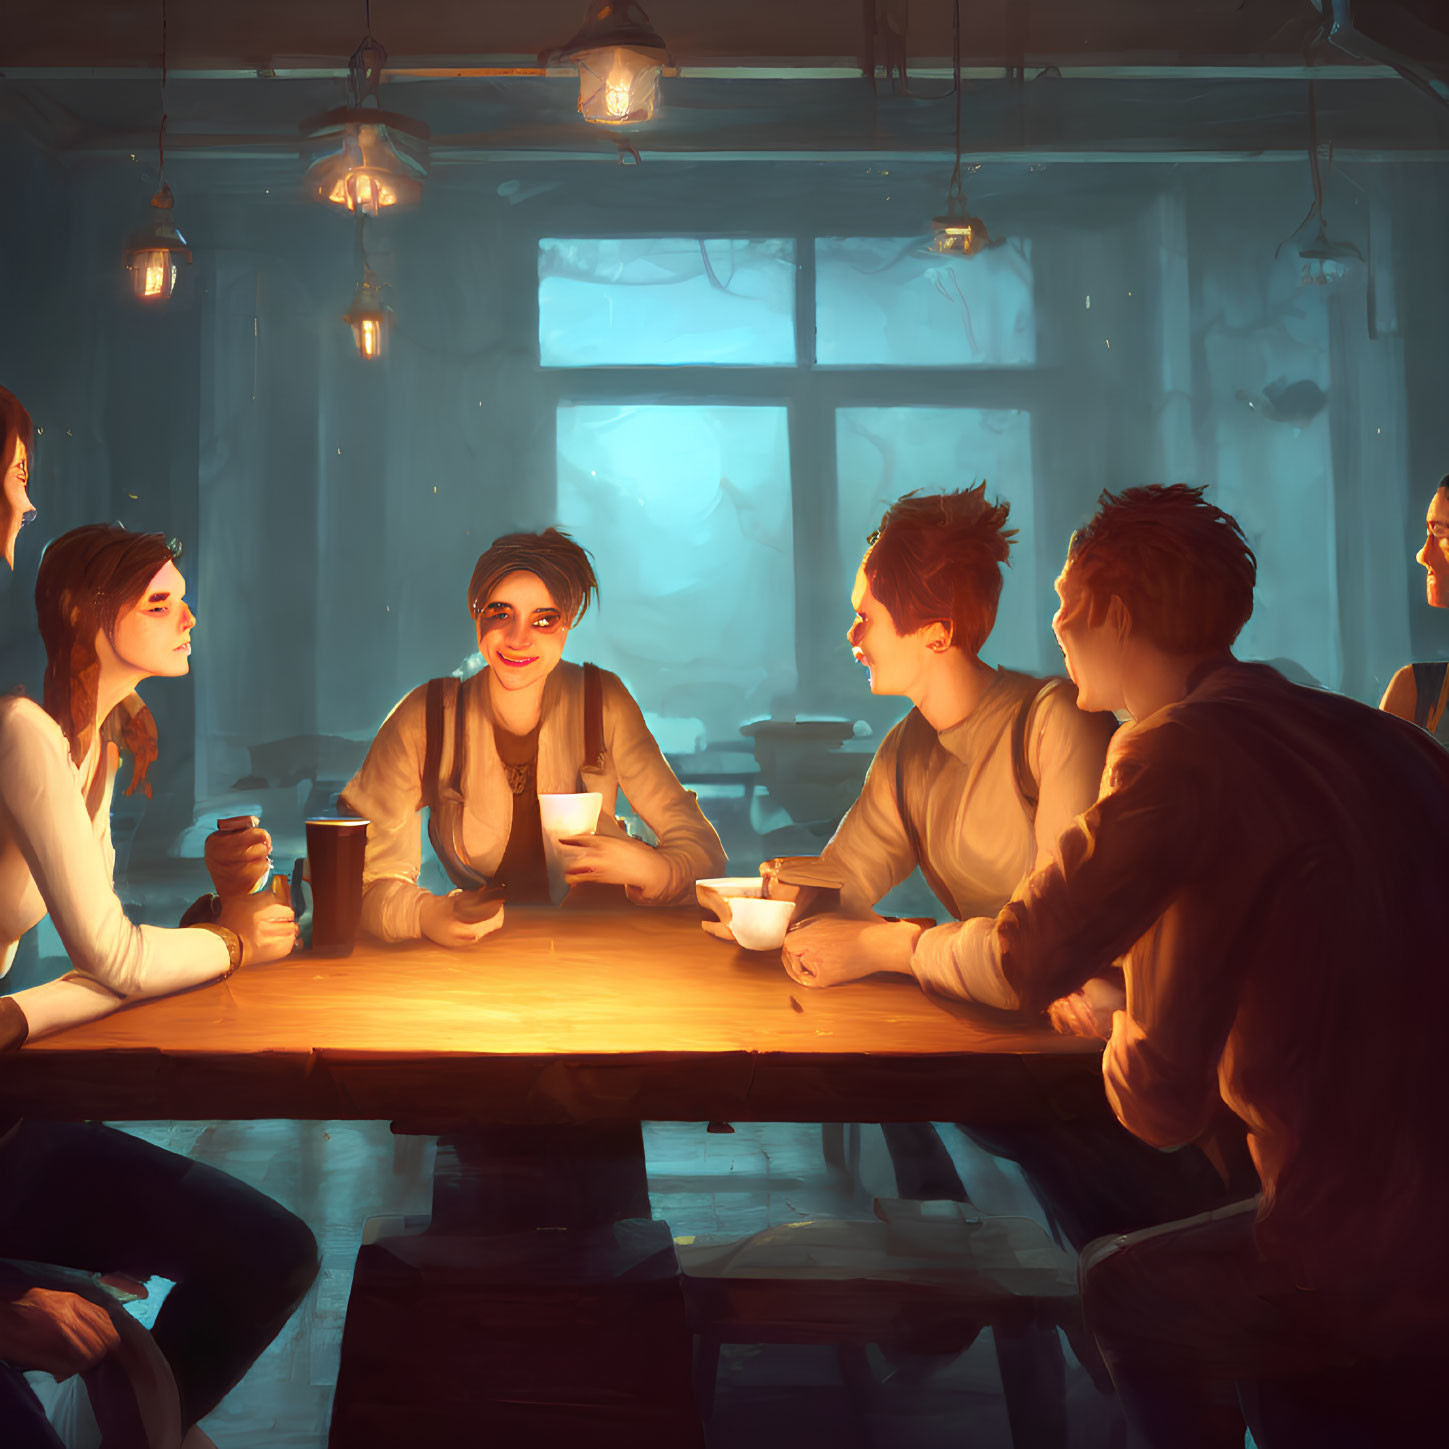 Friends chatting at cozy cafe table with warm lighting and coffee cups